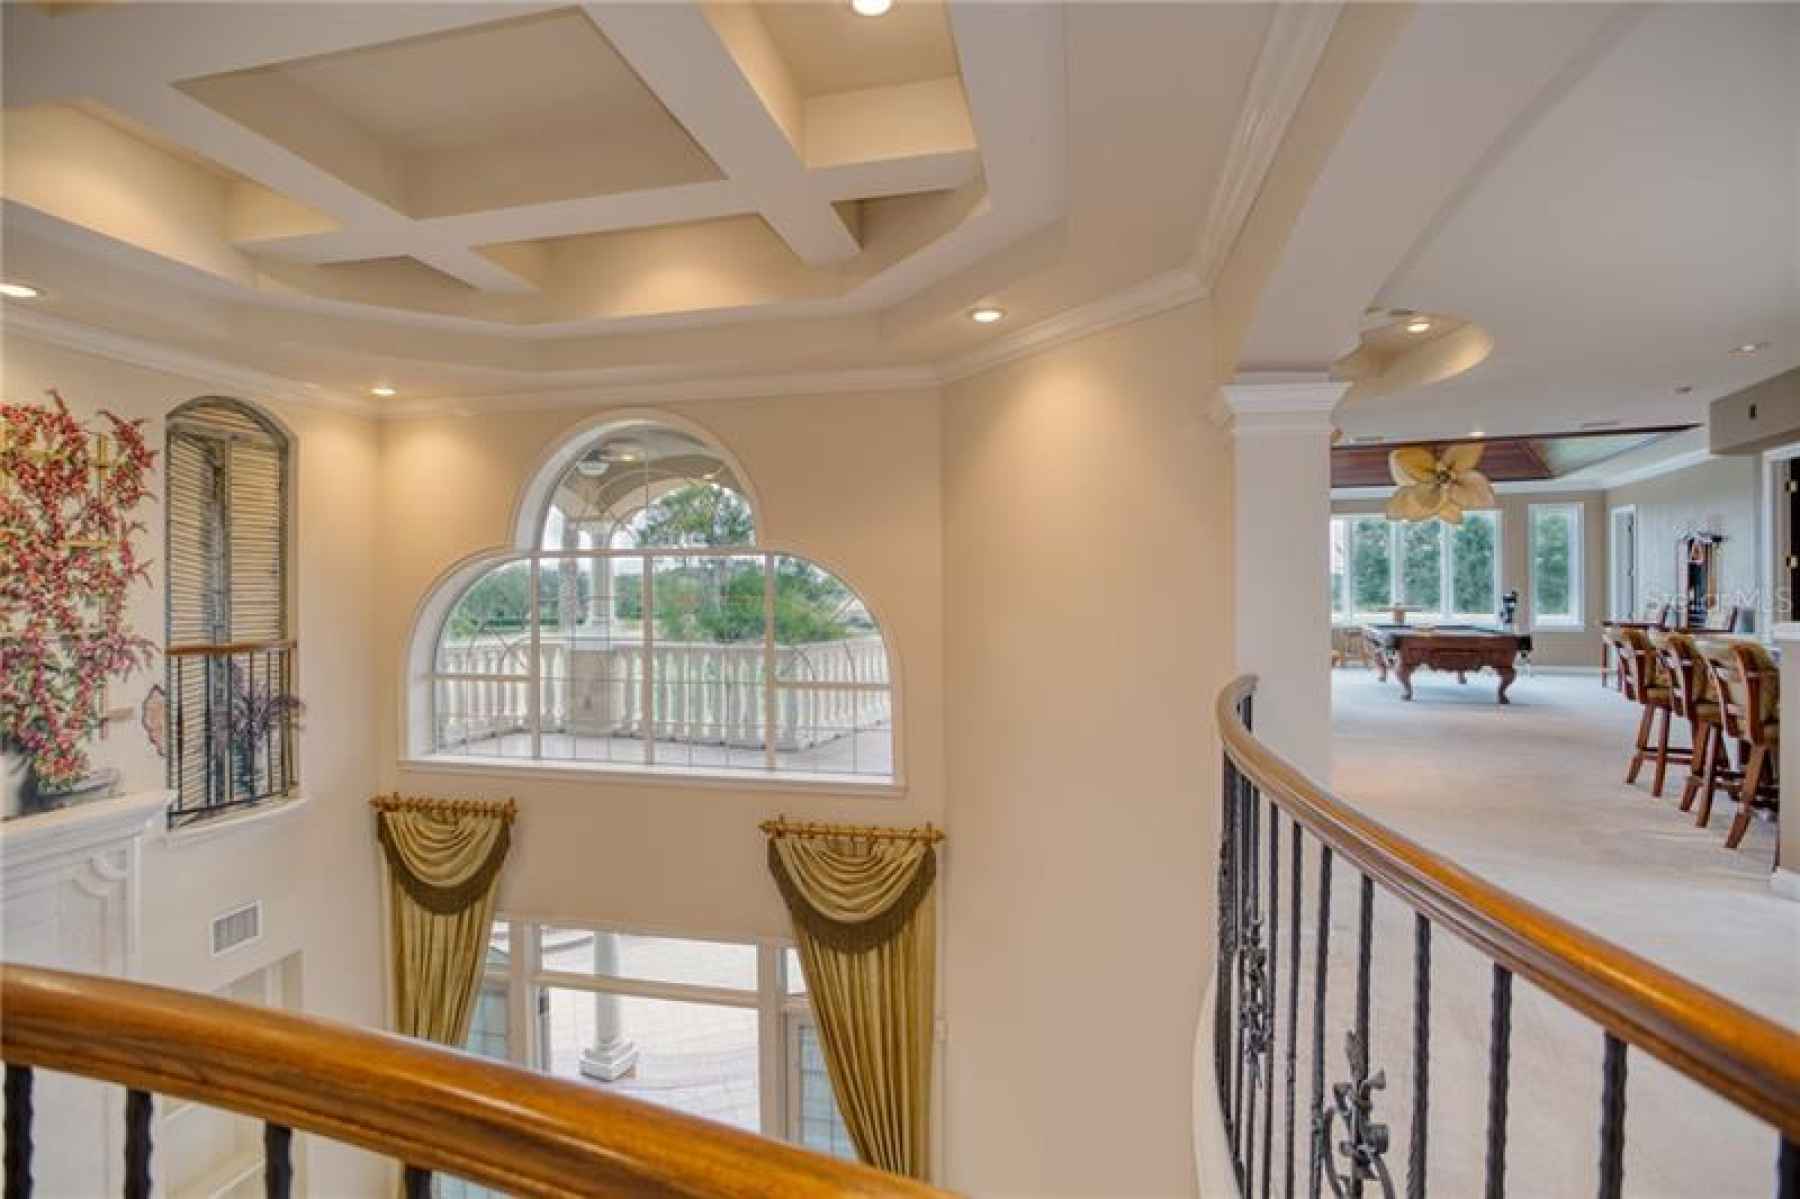 Ceiling detail overlooking balcony and game room